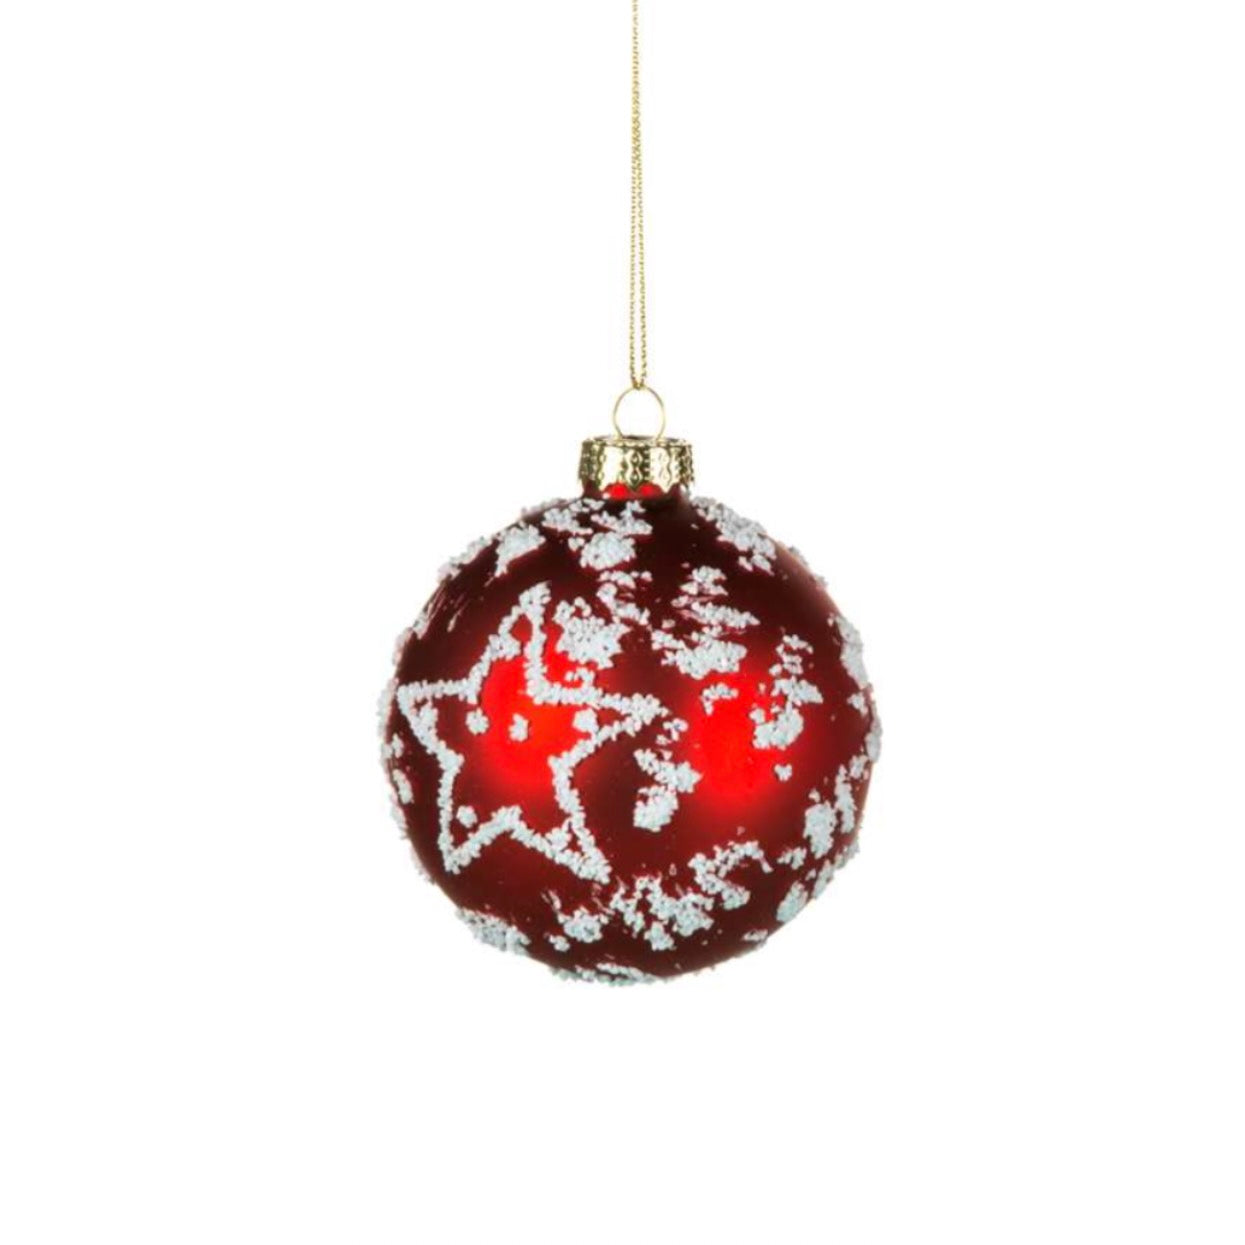 Matte Red with White Star Glass Ball Ornament